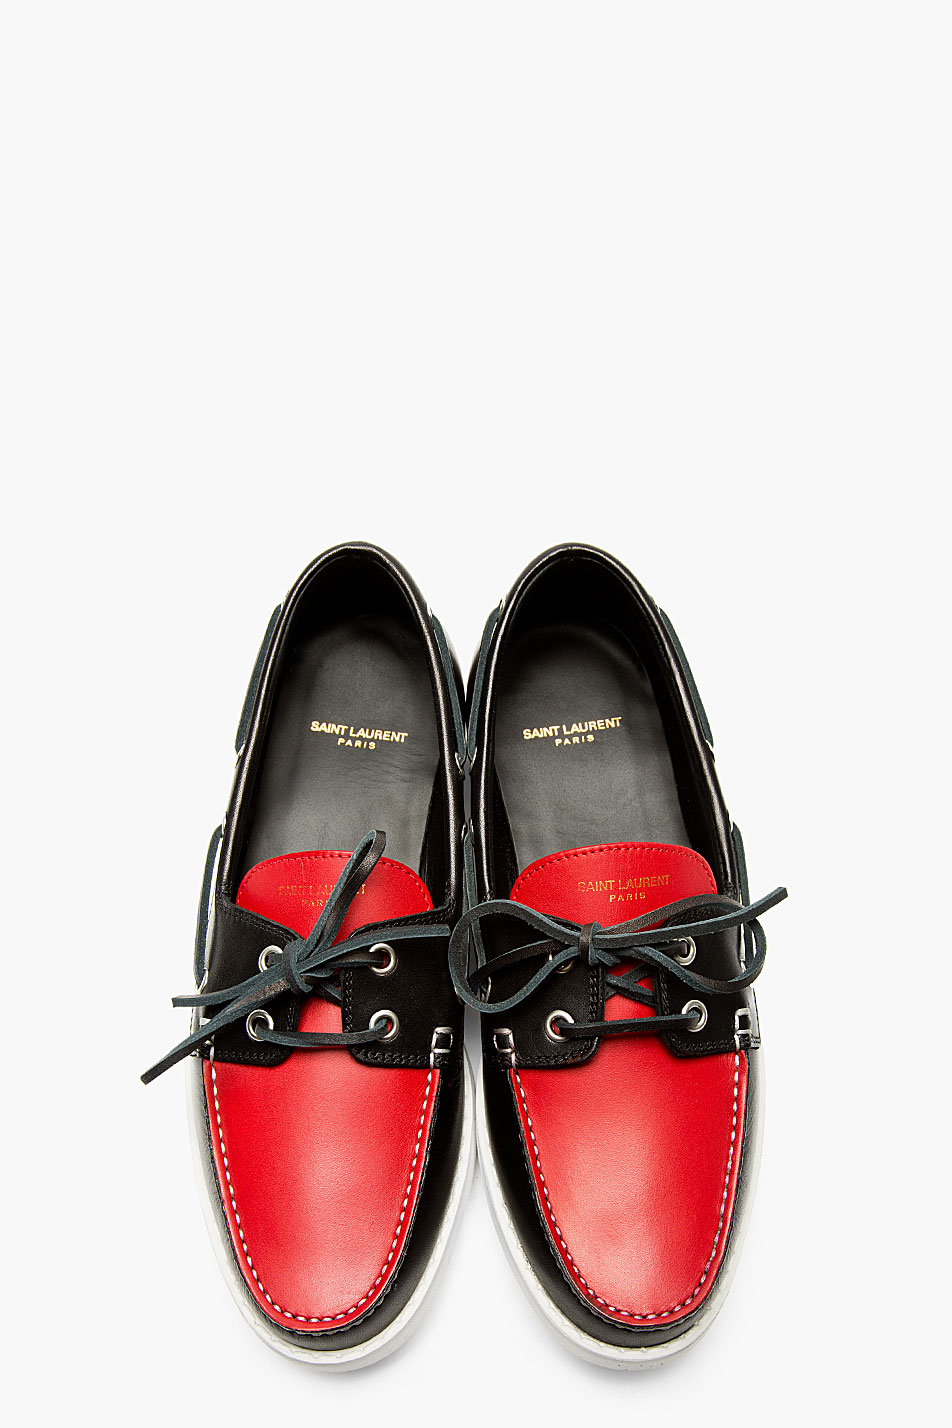 red boat shoes mens